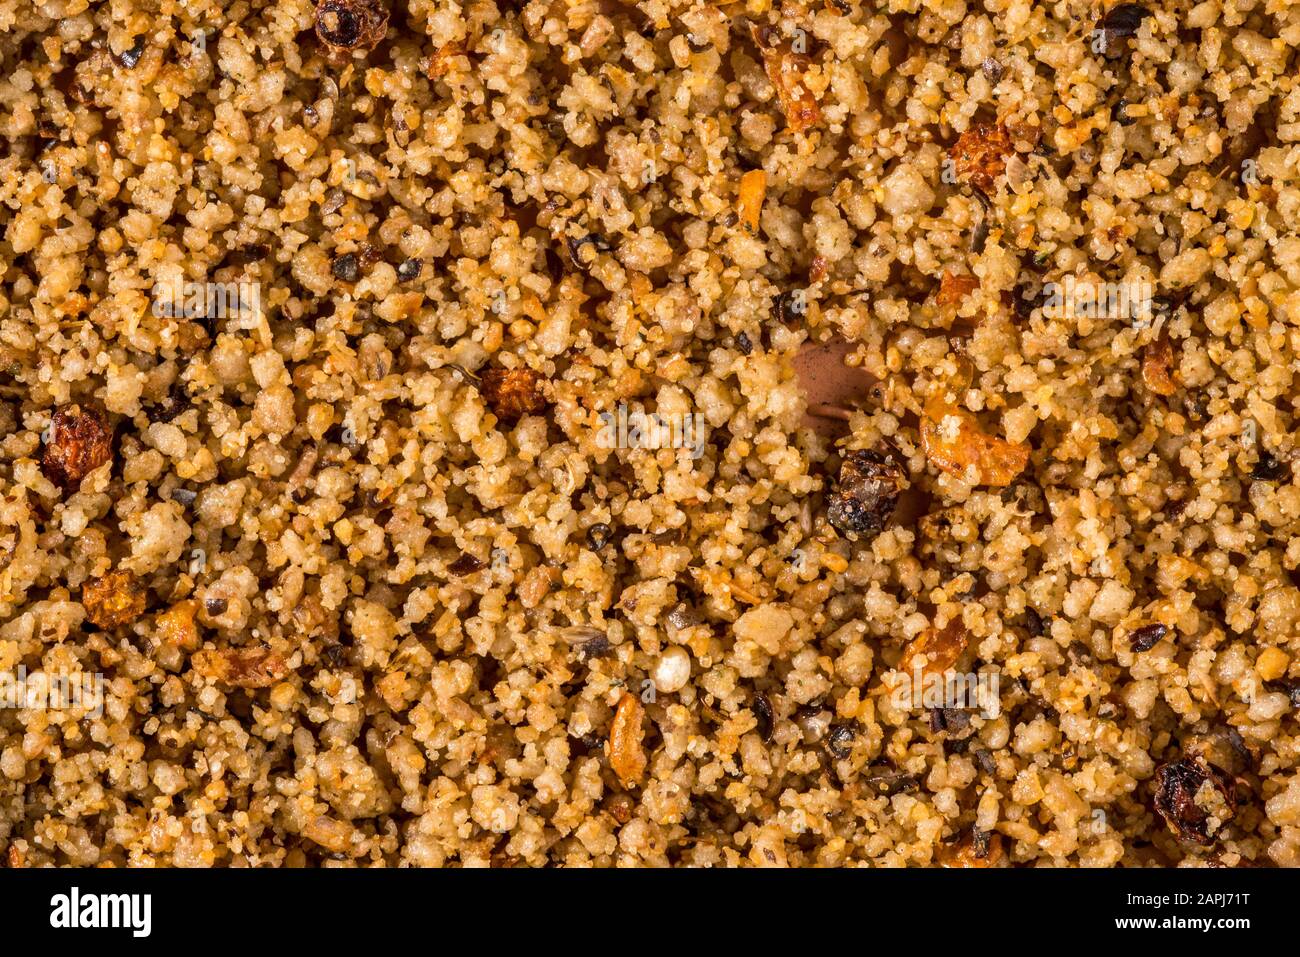 Close-up of healthy winter bird food patee for frugivorous and insectivorous garden birds containing seeds, fruits, insects and minerals Stock Photo